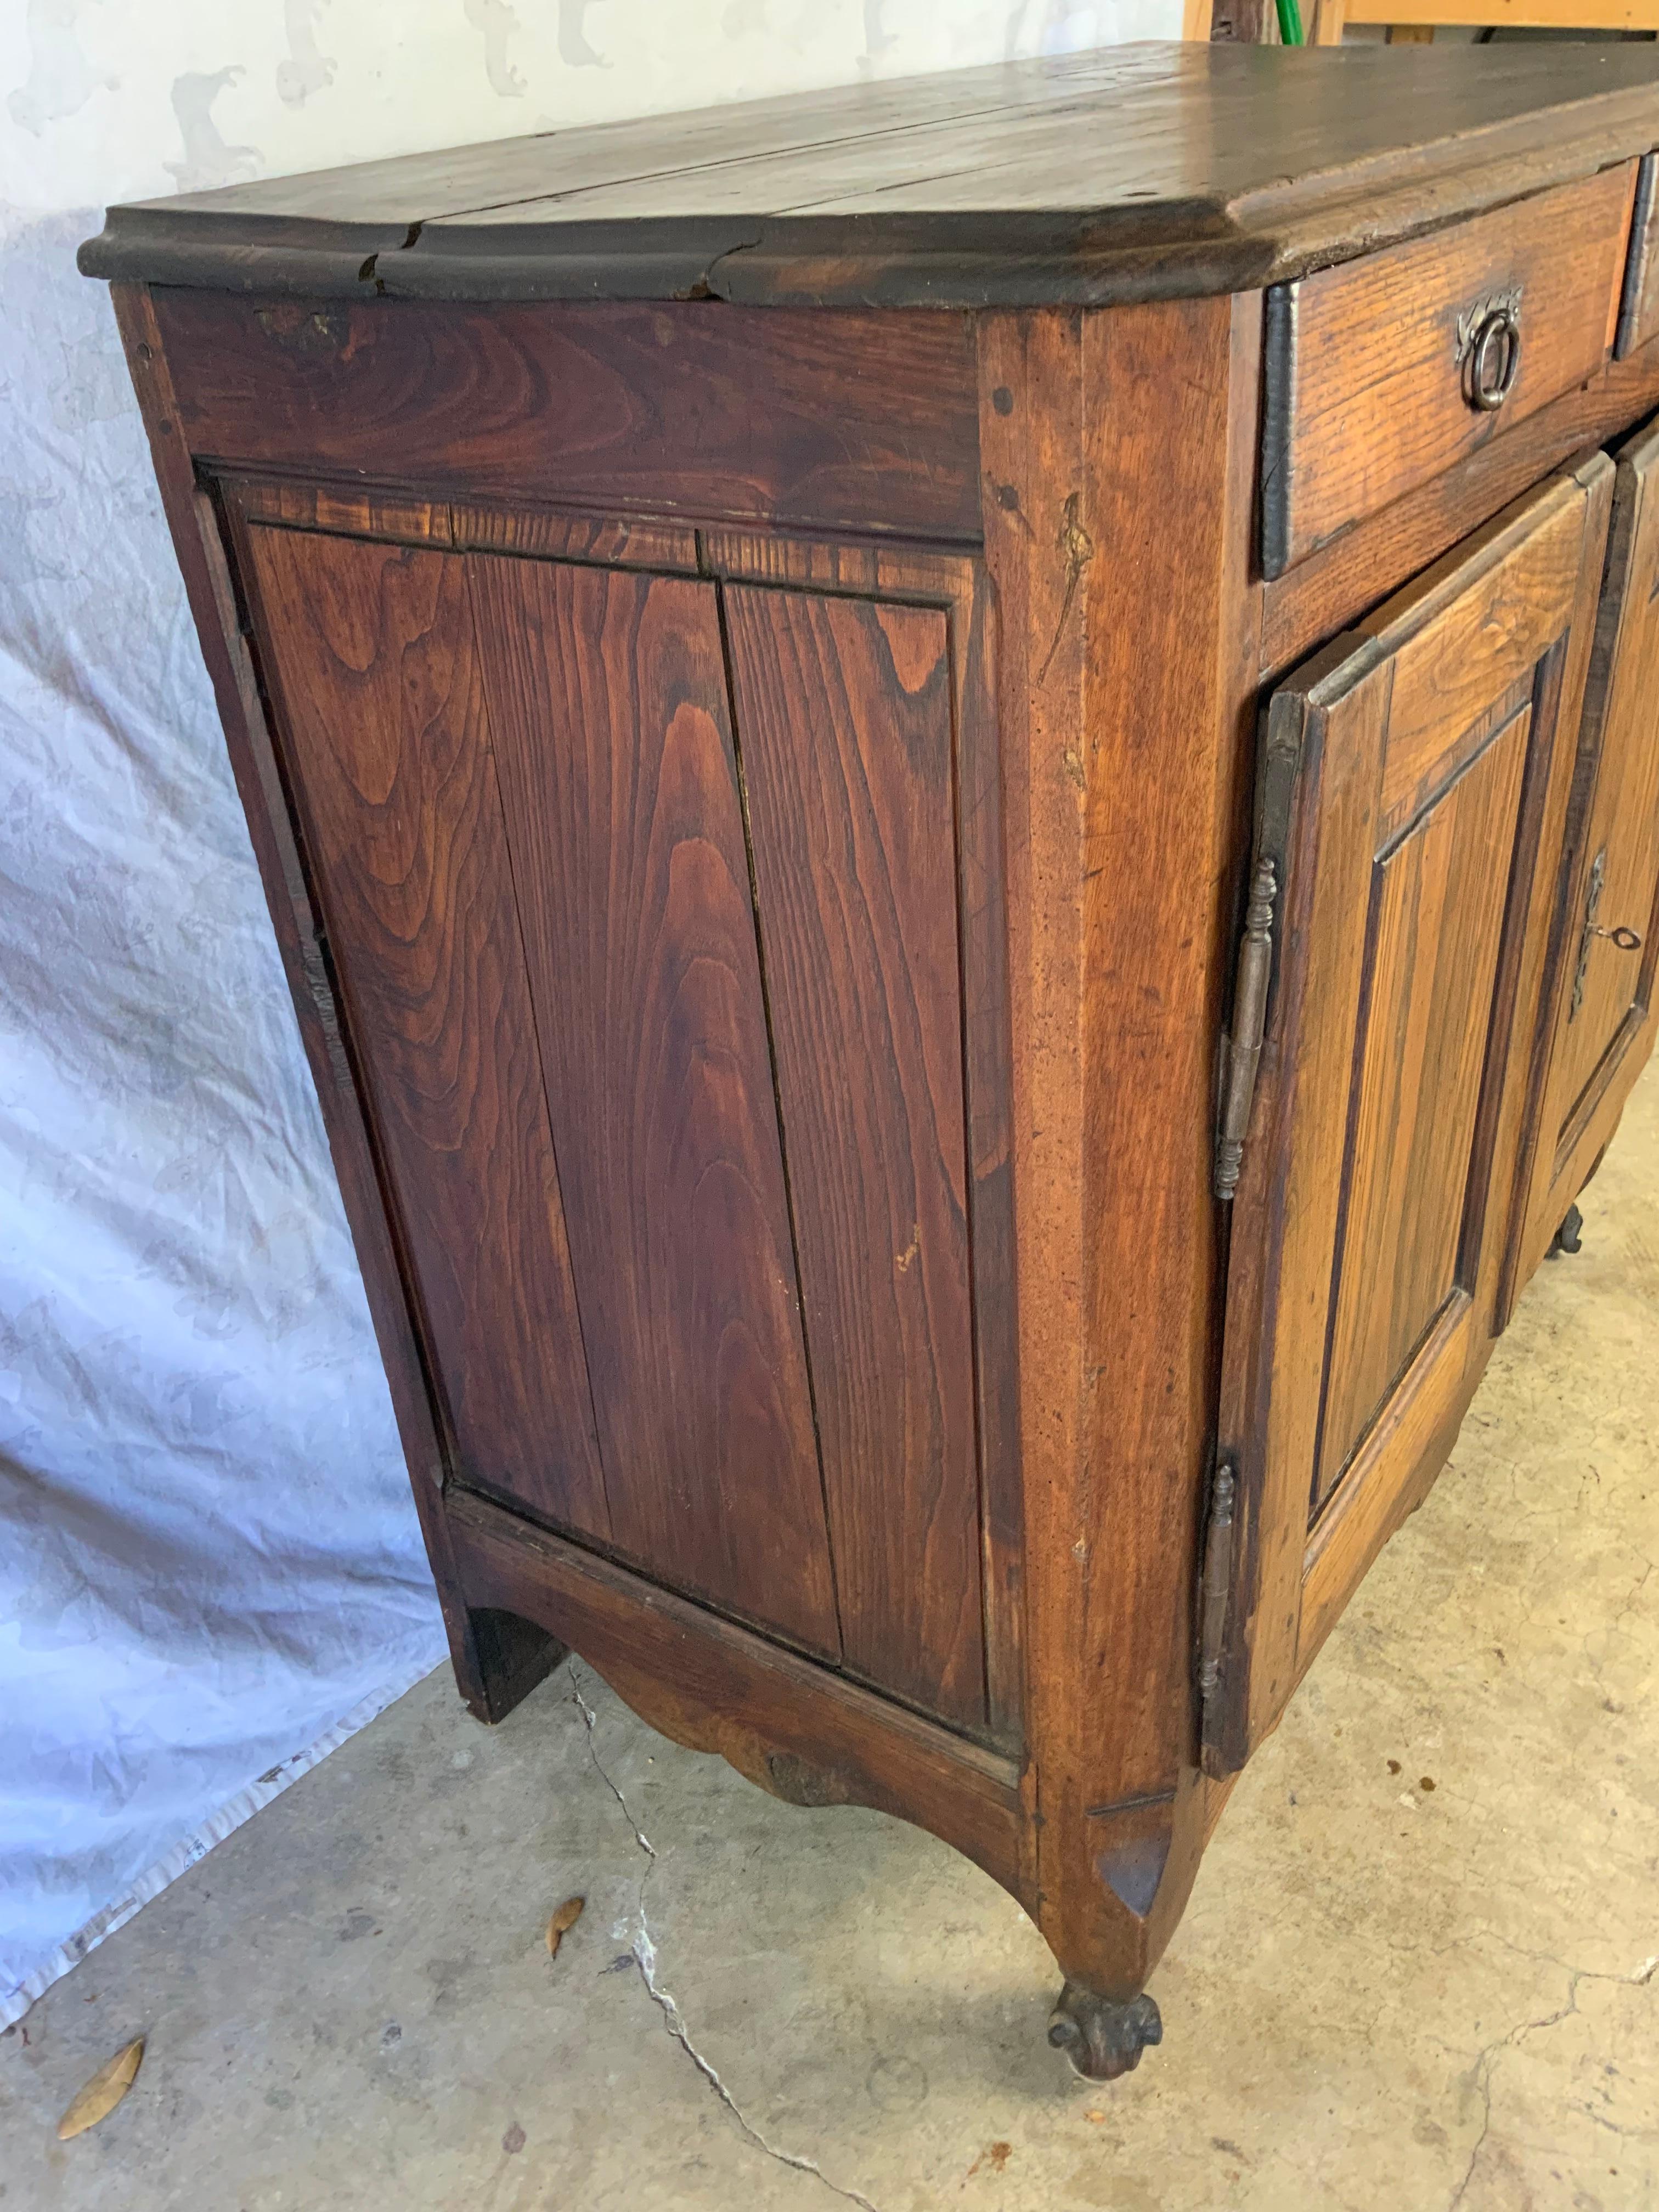 18th century Oak French Buffet in original surface. Raised panel sides and doors with the original working lock and key. One large original storage shelf in the bottom cupboard area. This was a well used utilitarian piece of furniture which retains